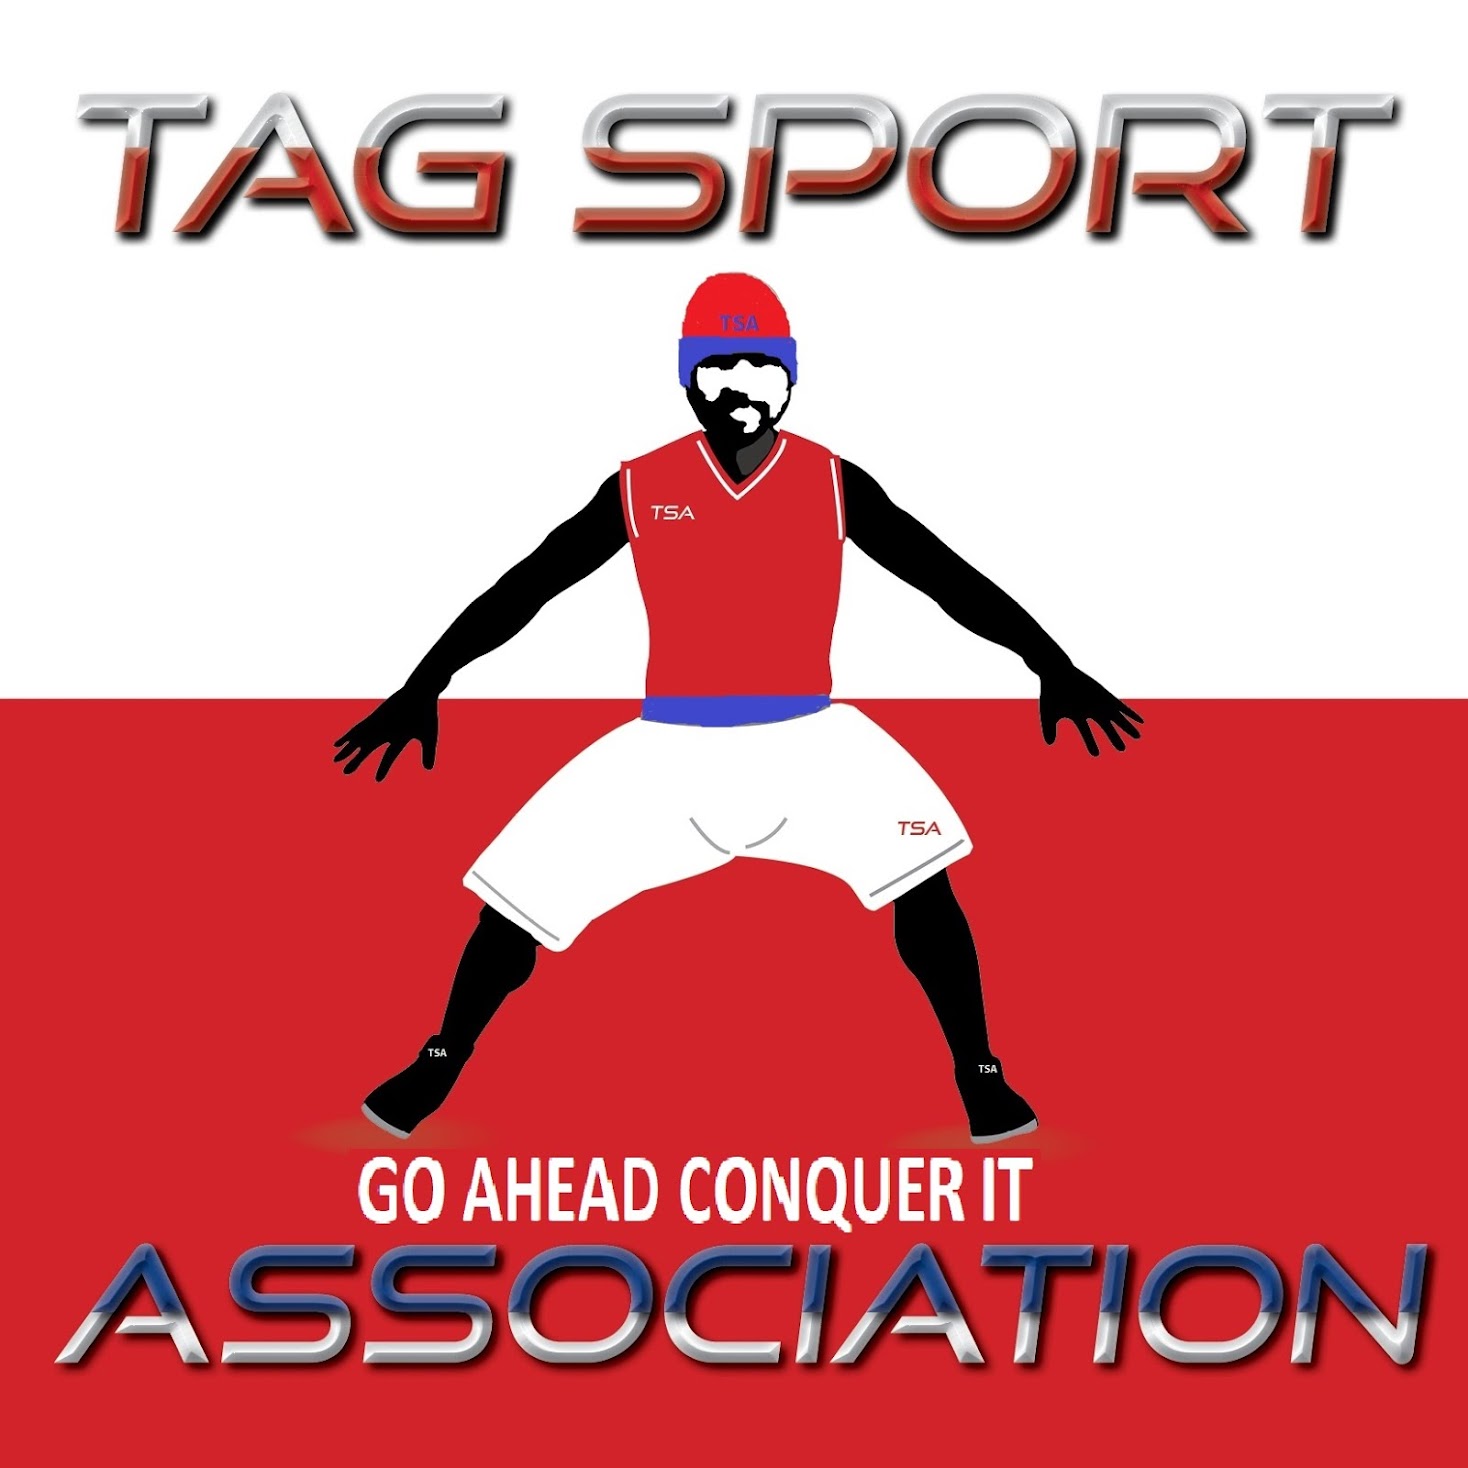 TAG SPORT ASSOCIATION GO AHEAD AND CONQUER IT